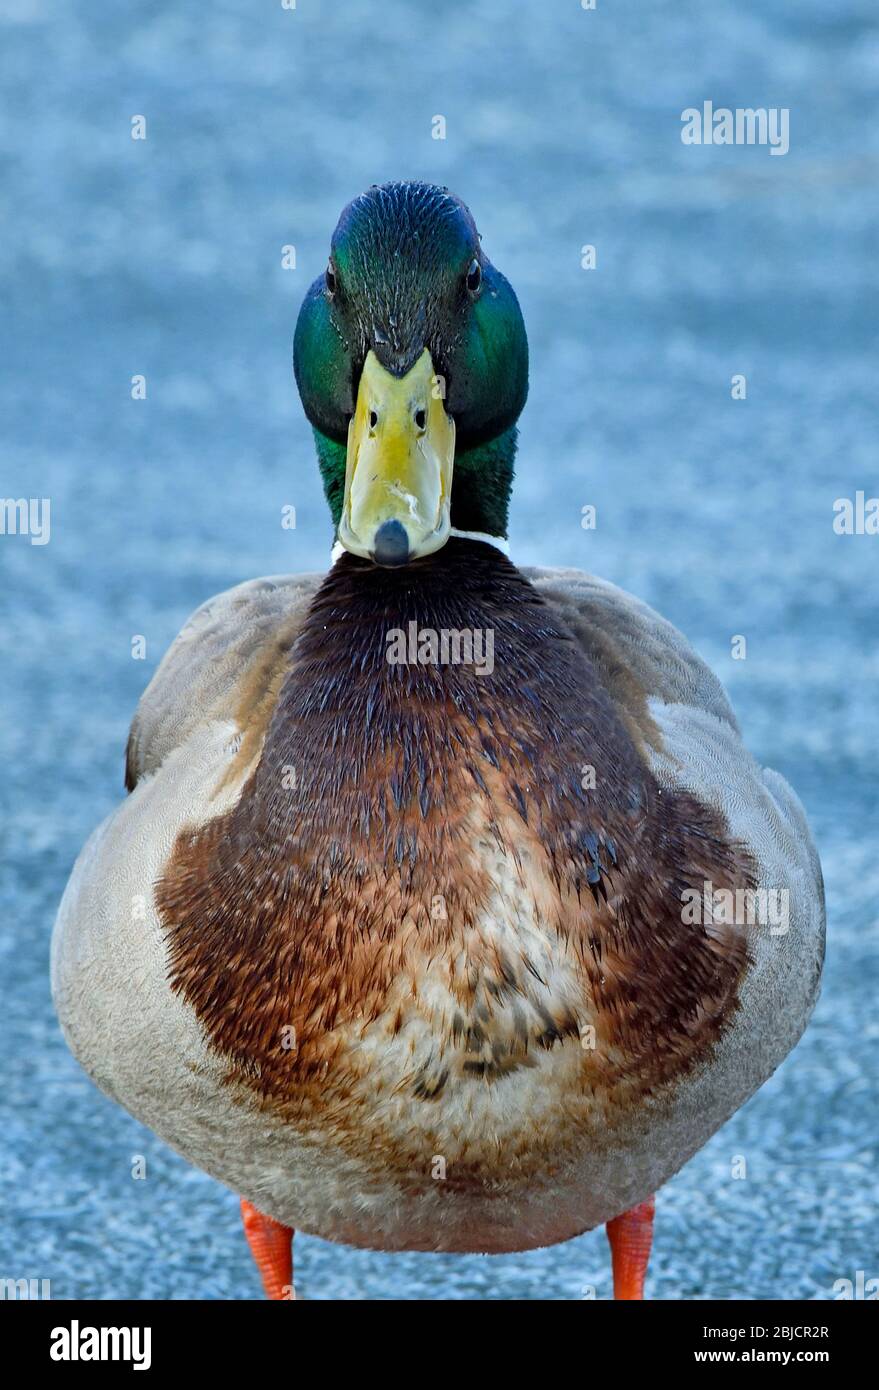 A close up image of a male mallard duck 'Anas platyrhynchos', standing on the frozen water of a beaver pond near Hinton Alberta Canada. Stock Photo